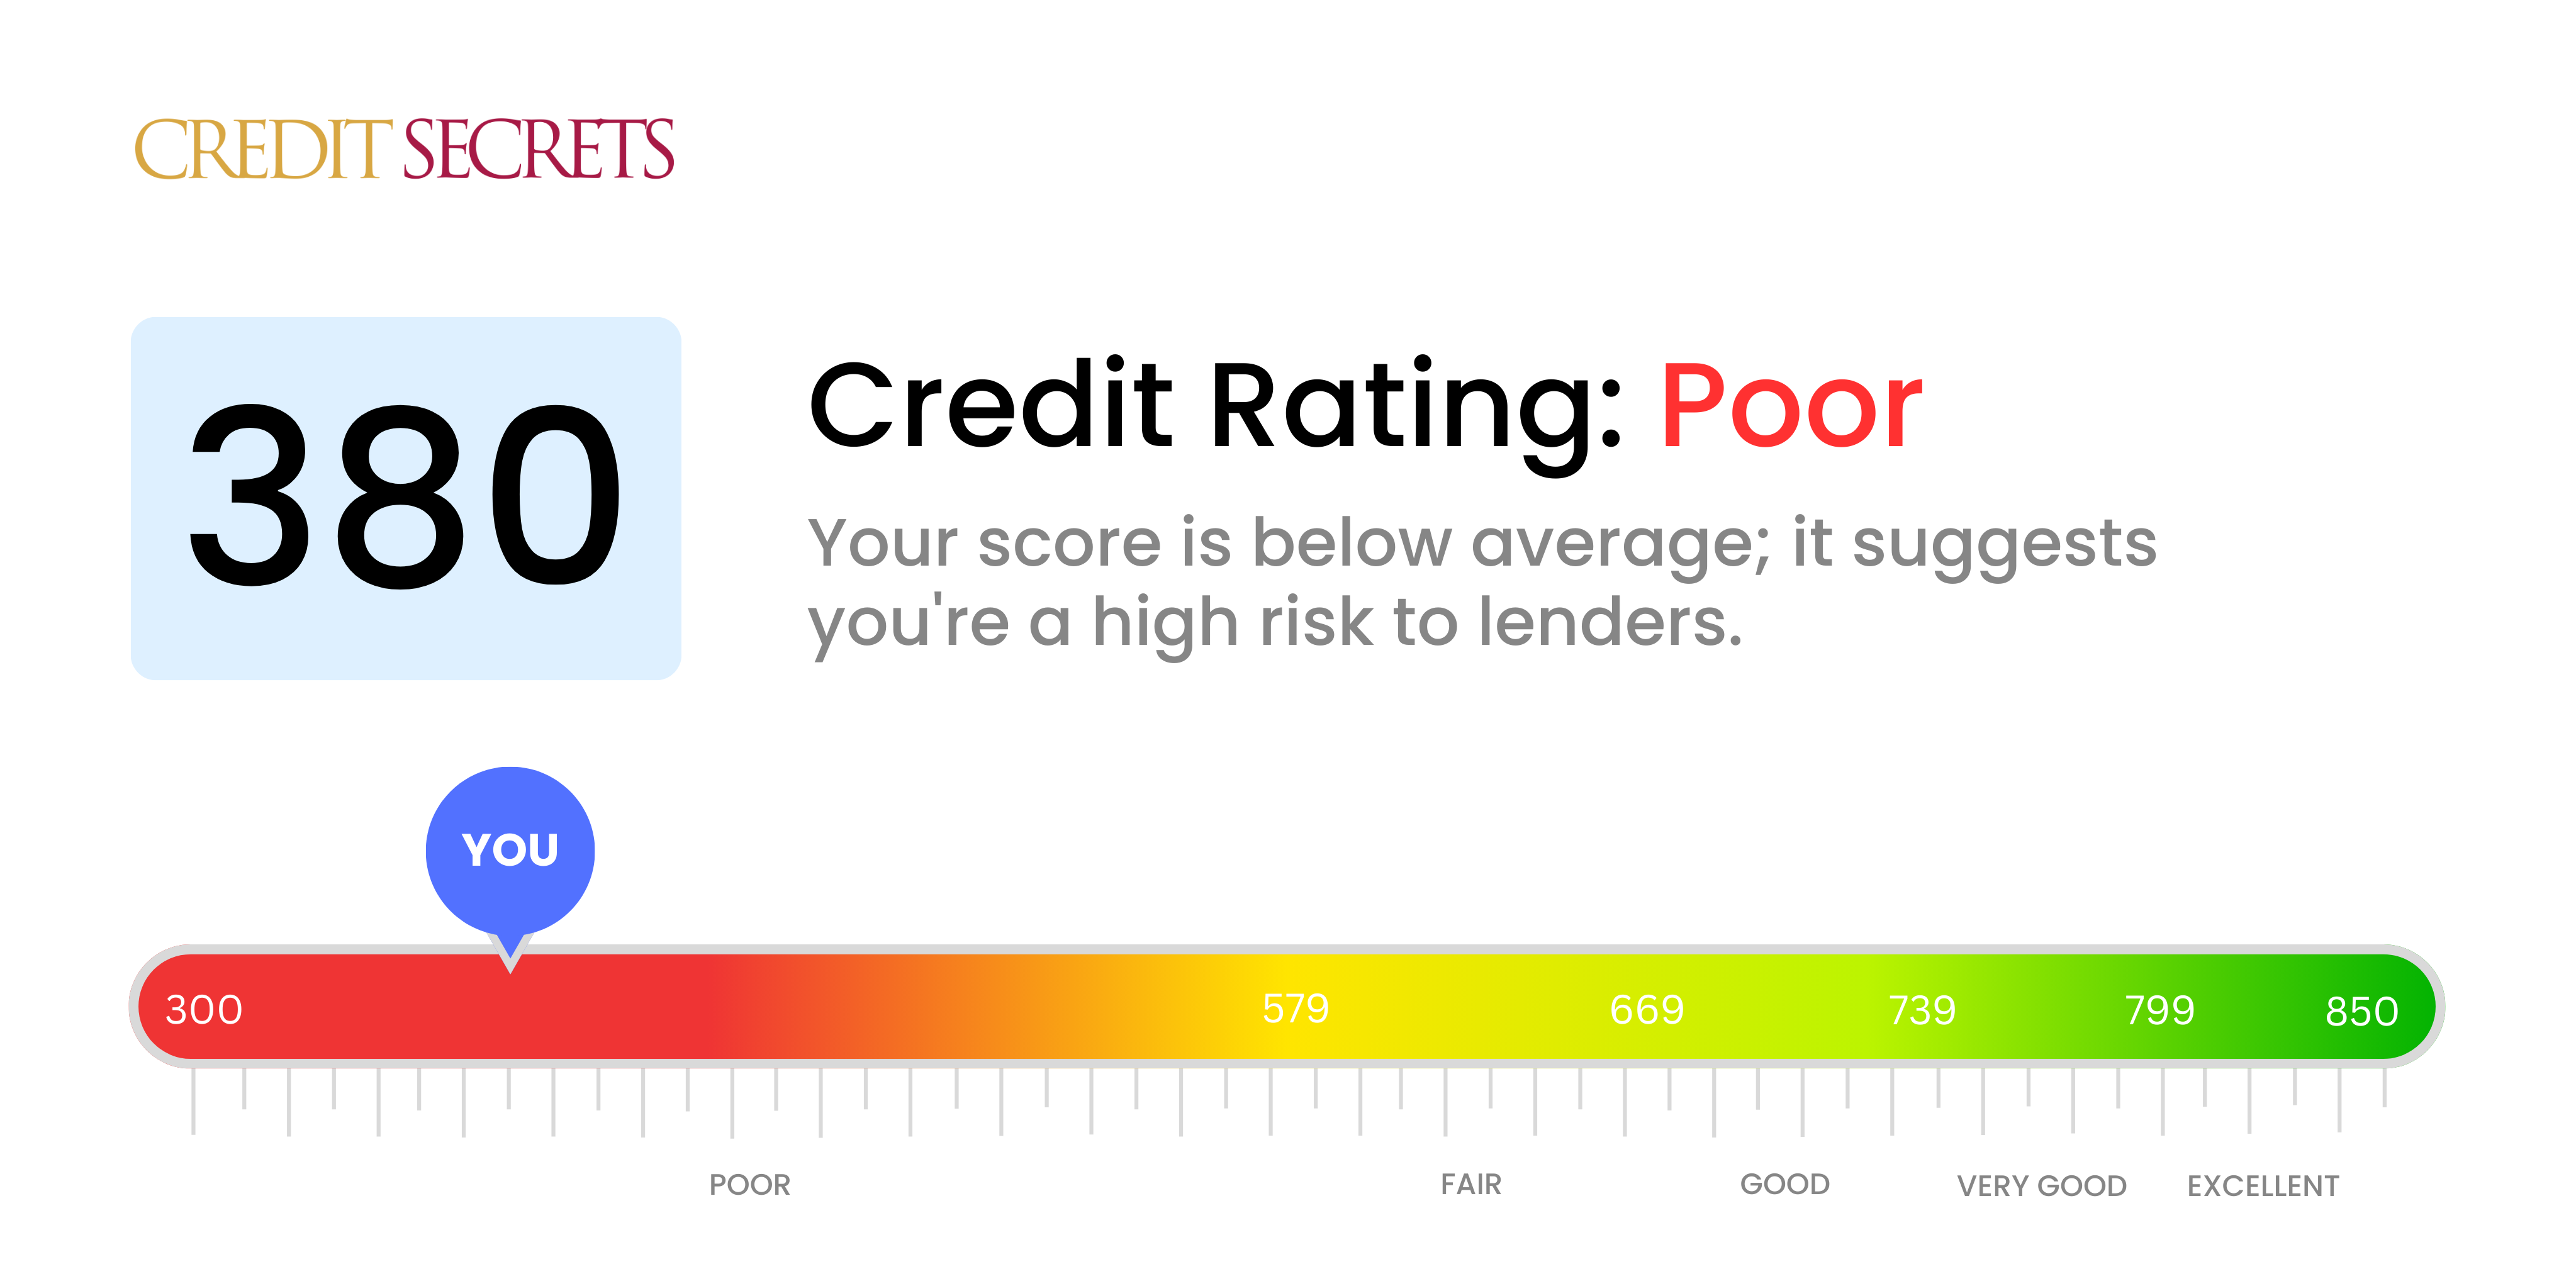 Is 380 a good credit score?